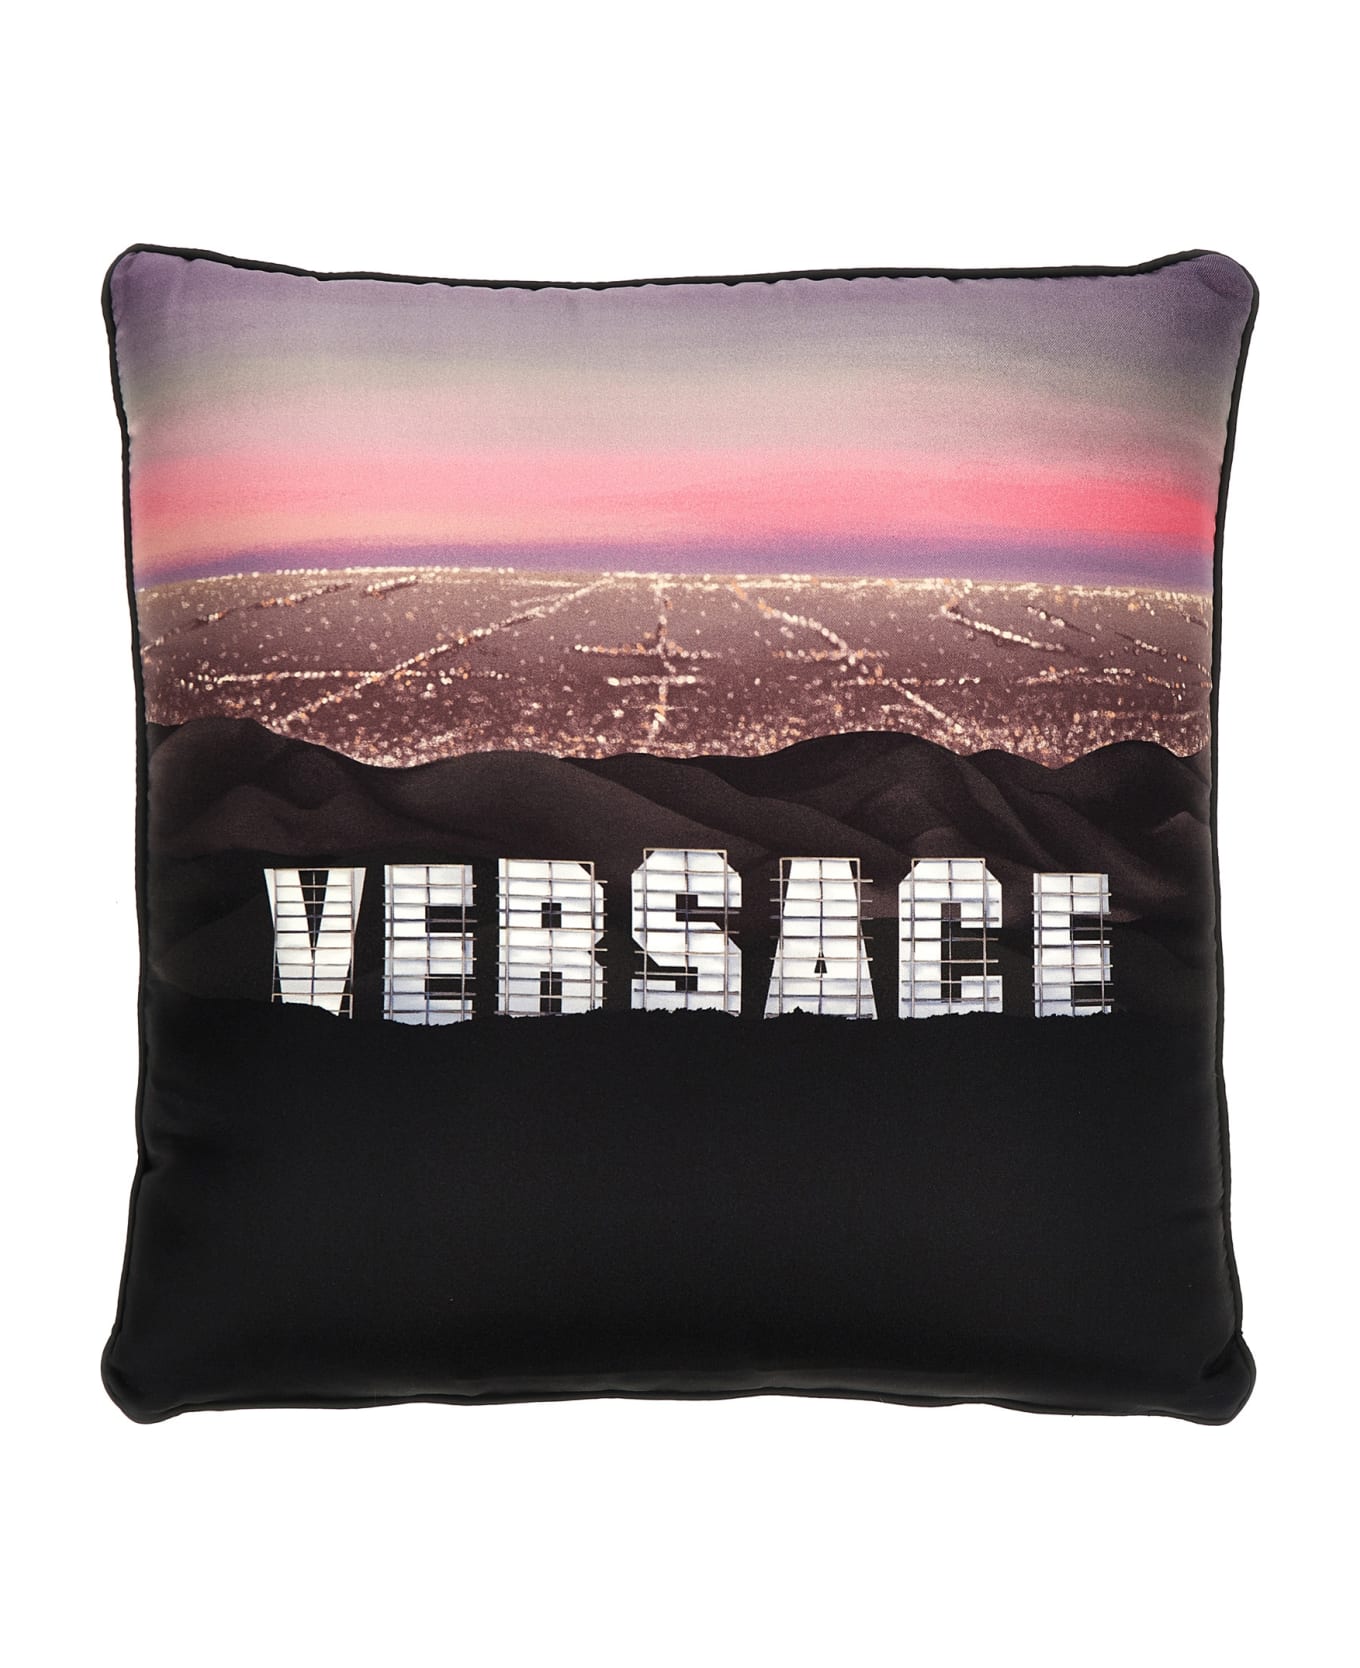 Versace 'versace Hill' Cushion - Multicolor クッション